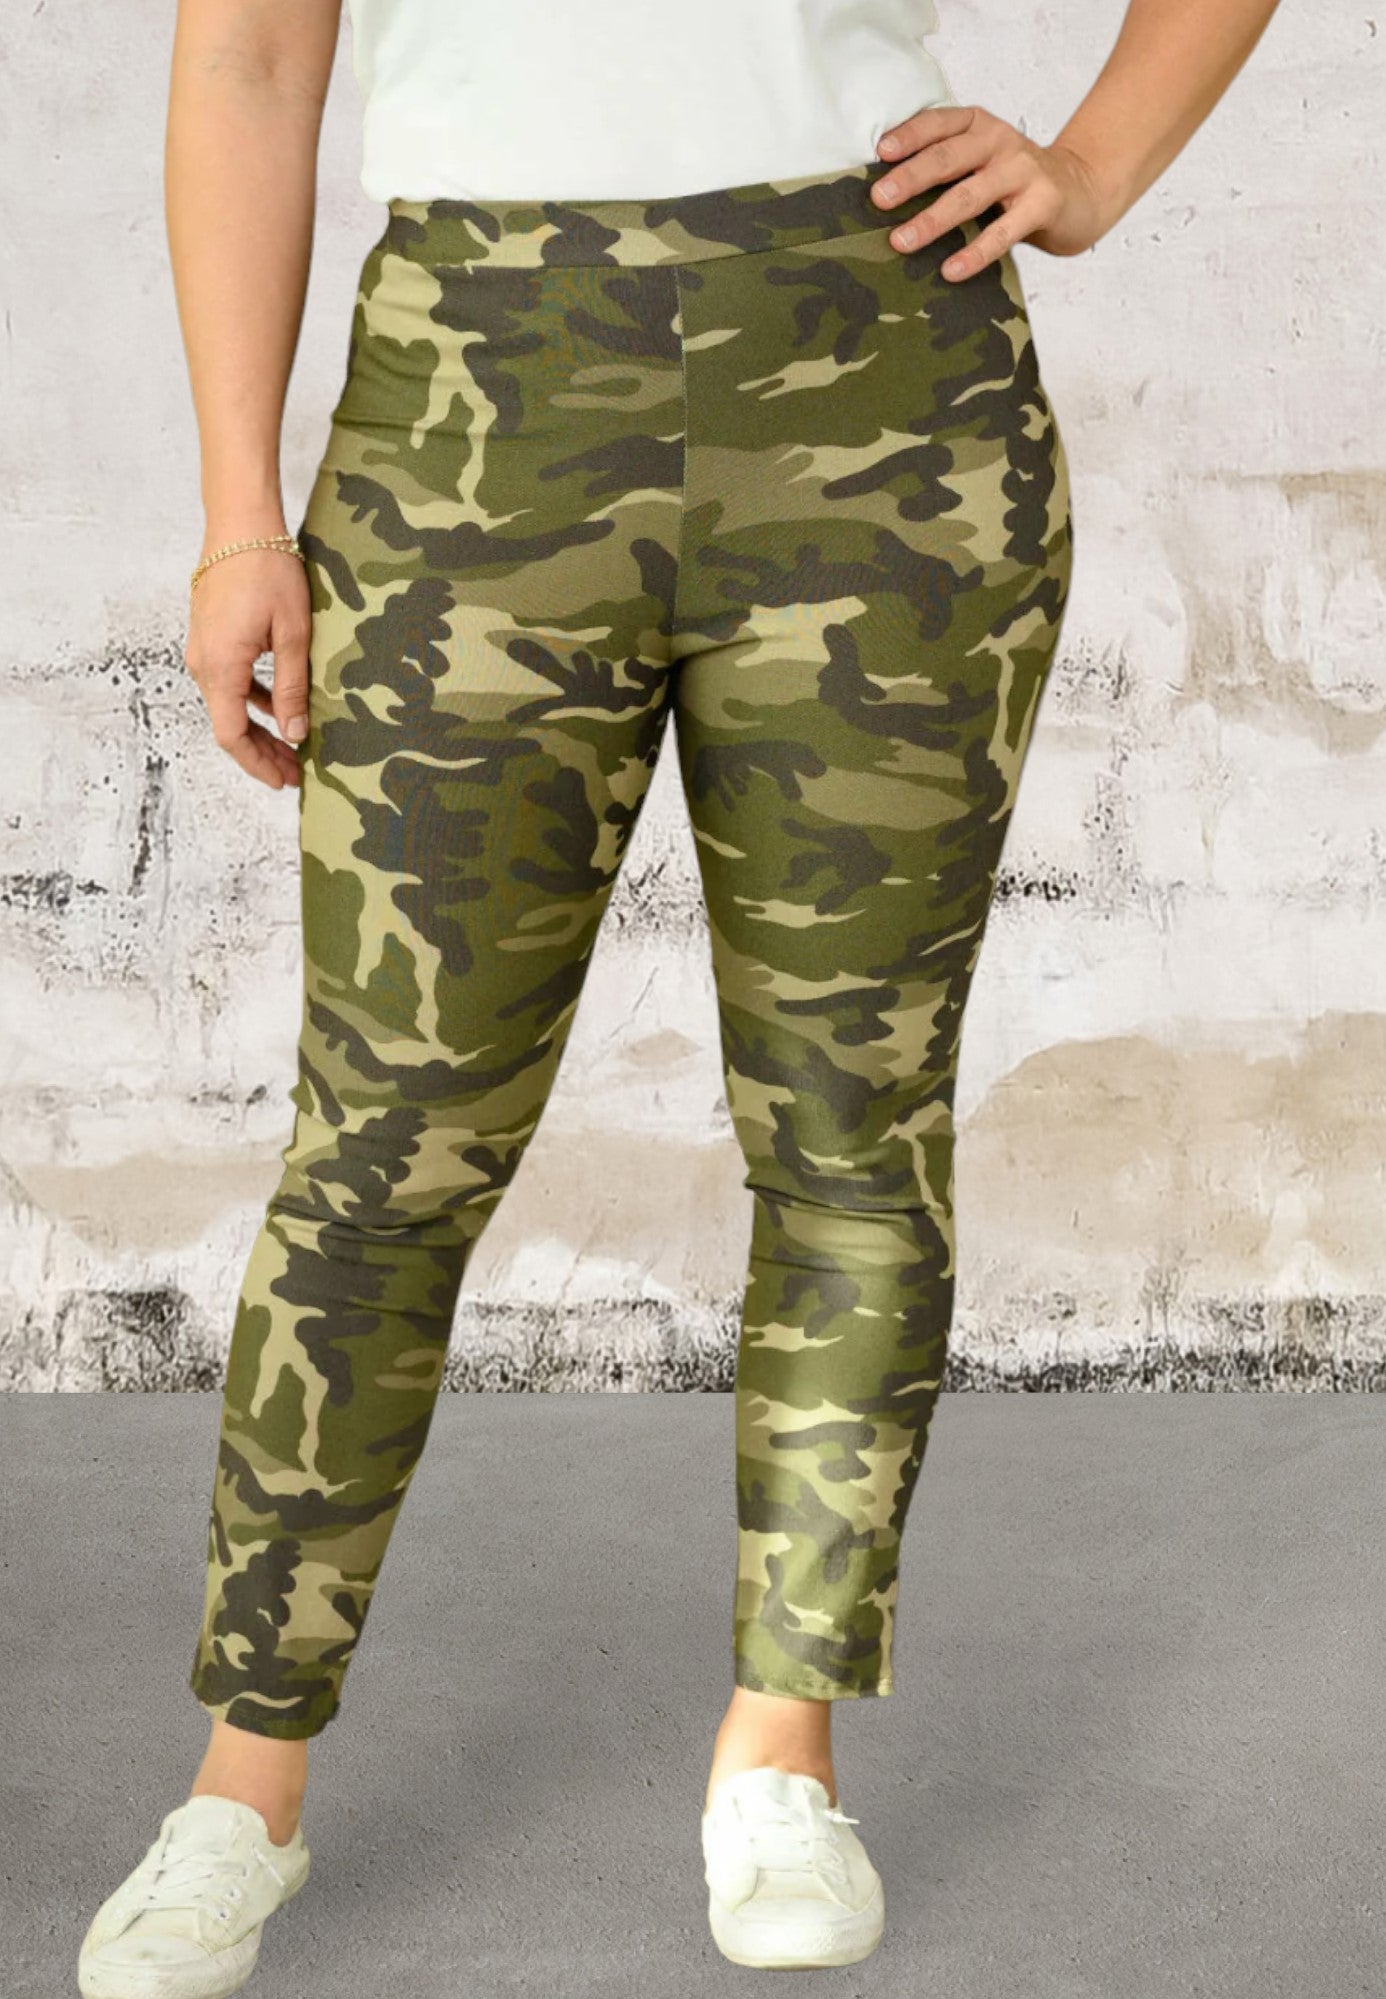 Plus size stretchy camouflage pants